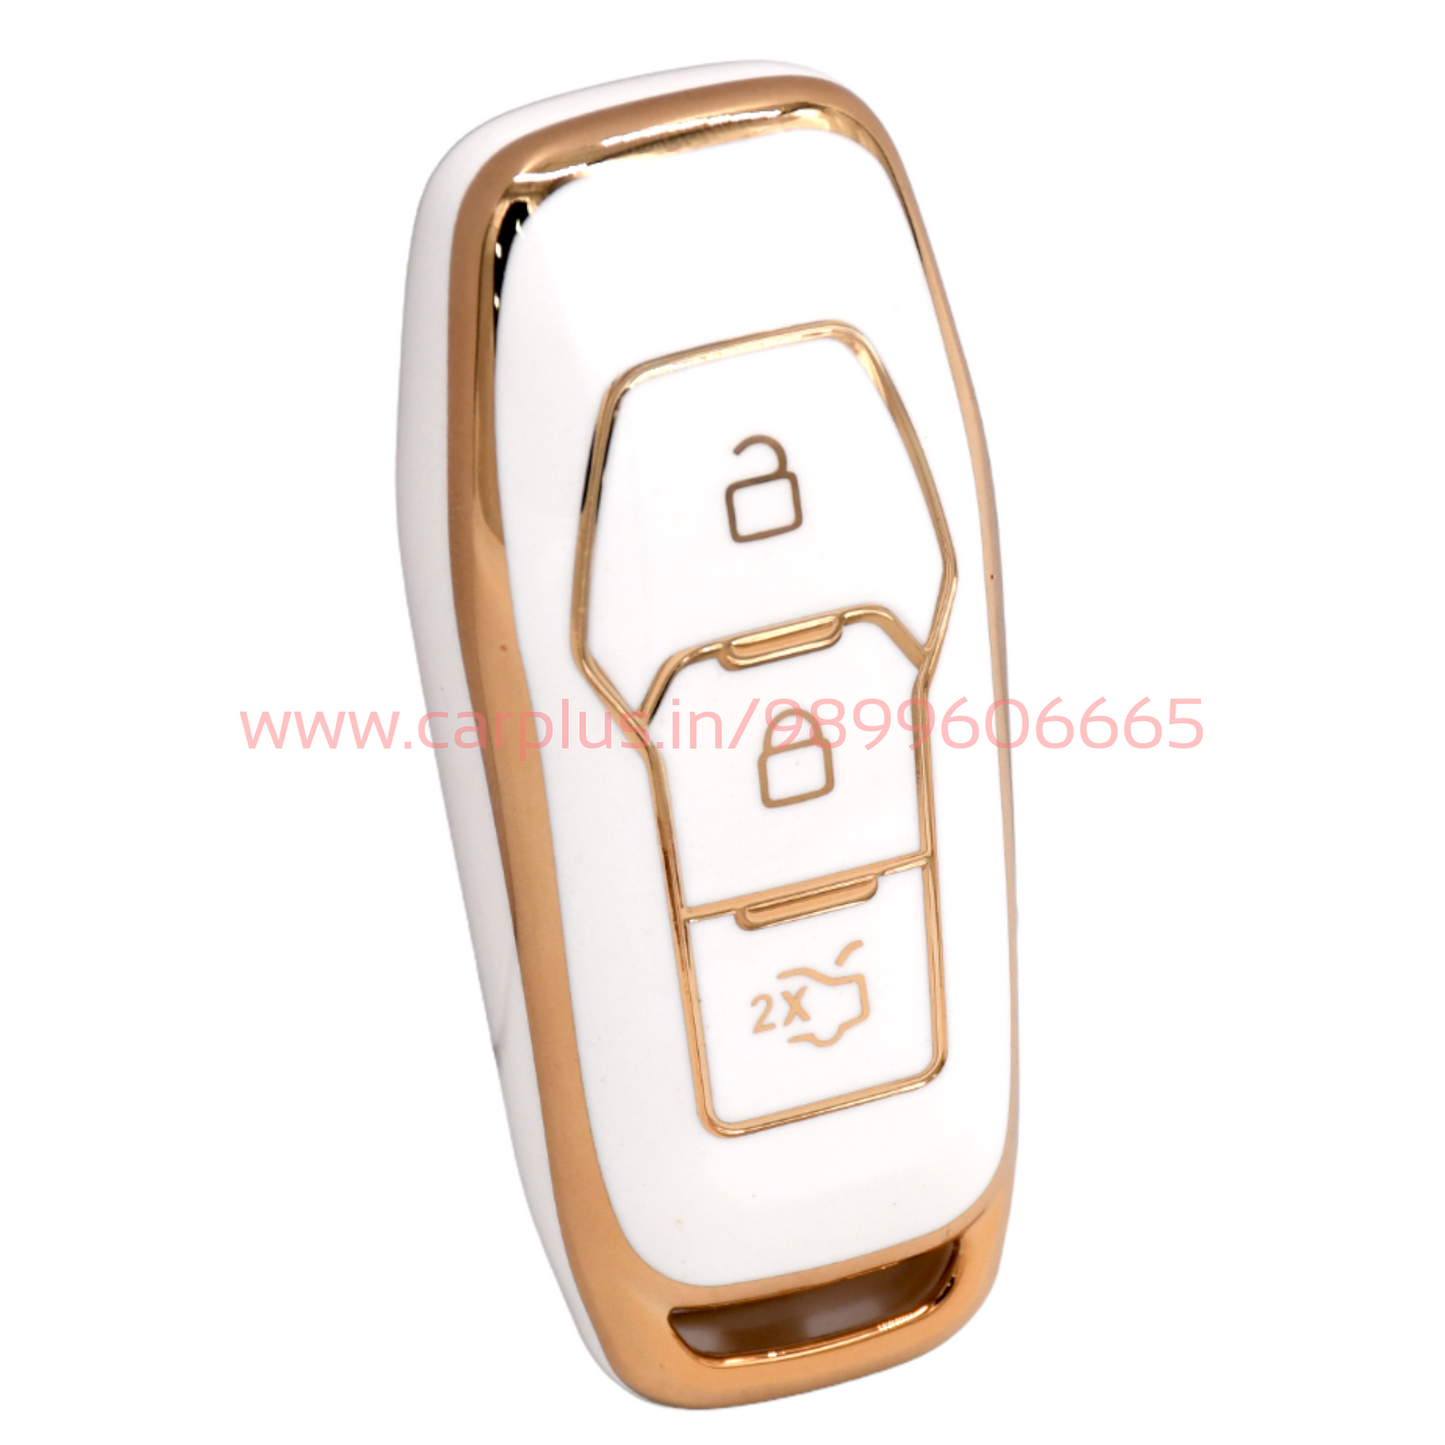 
                  
                    KMH - TPU Gold Car Key Cover Compatible with Ford 3 Push Button Smart Key-TPU GOLD KEY COVER-KMH-KEY COVER-White-CARPLUS
                  
                